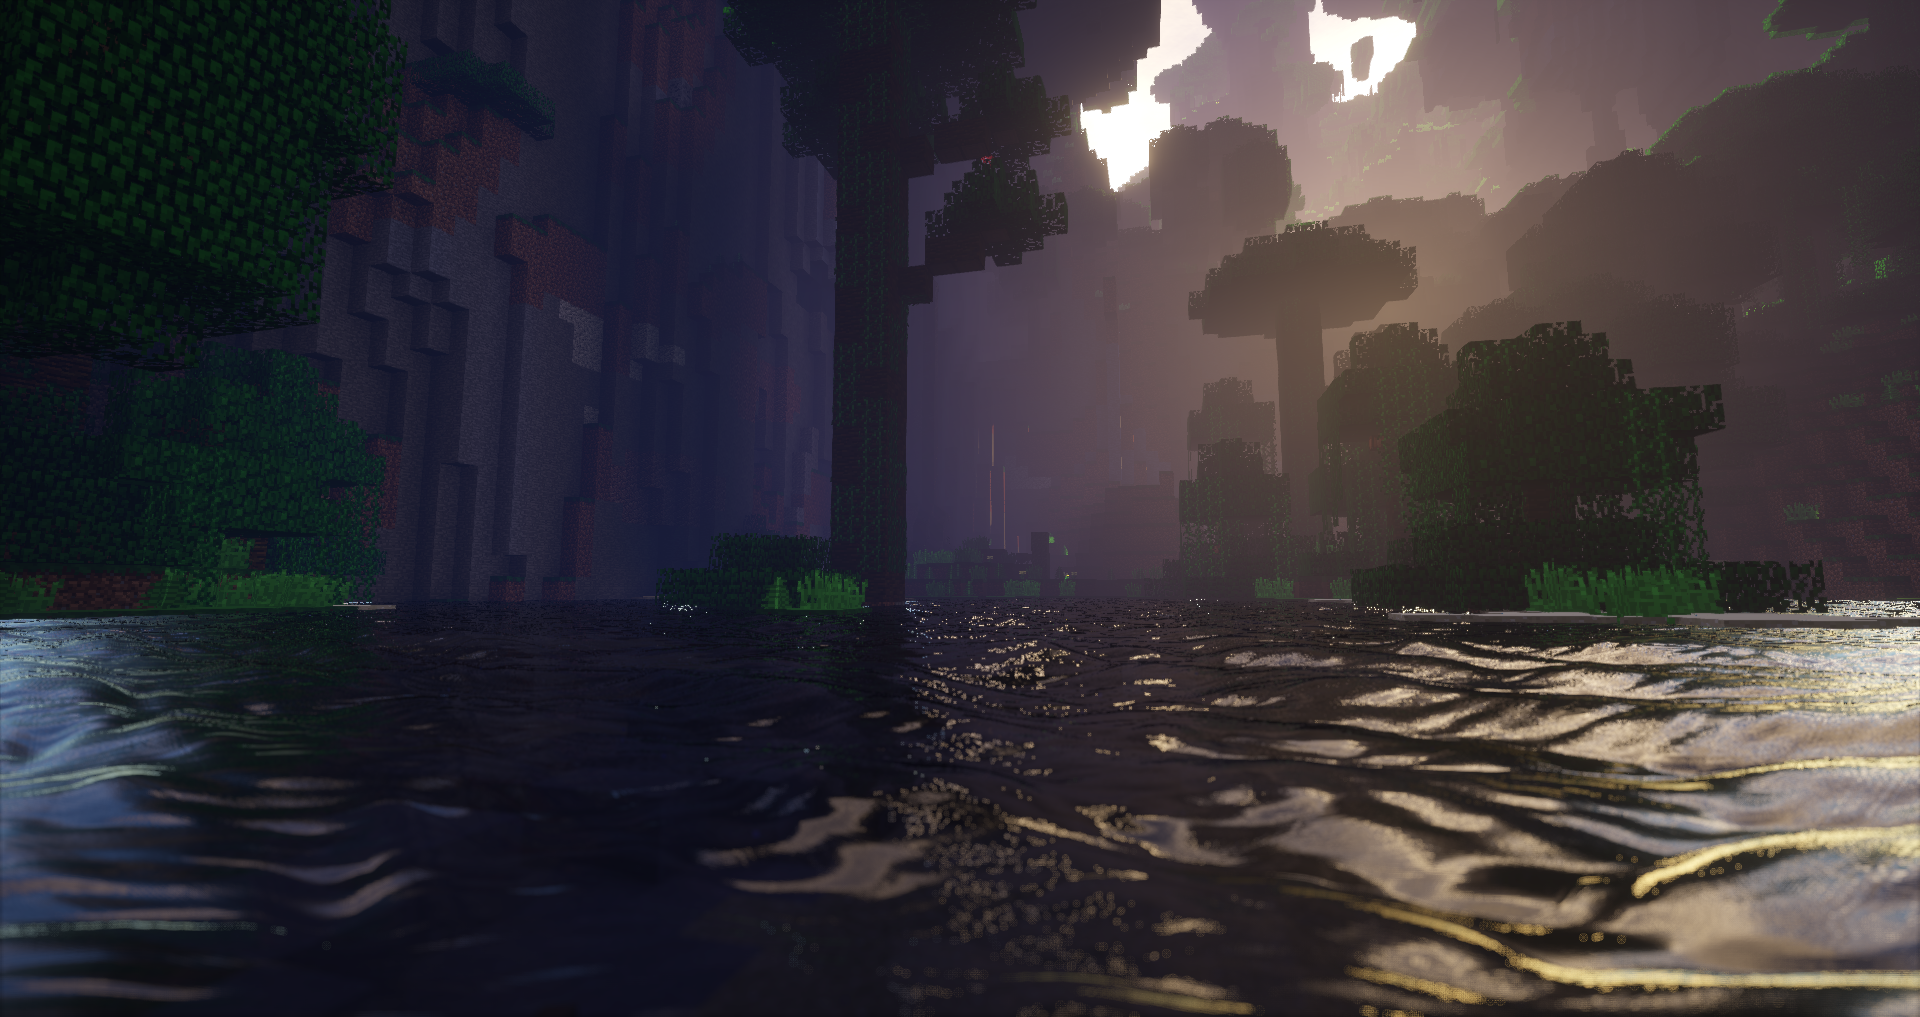 images/2406/14/Beyond_Belief_Shaders_9.png